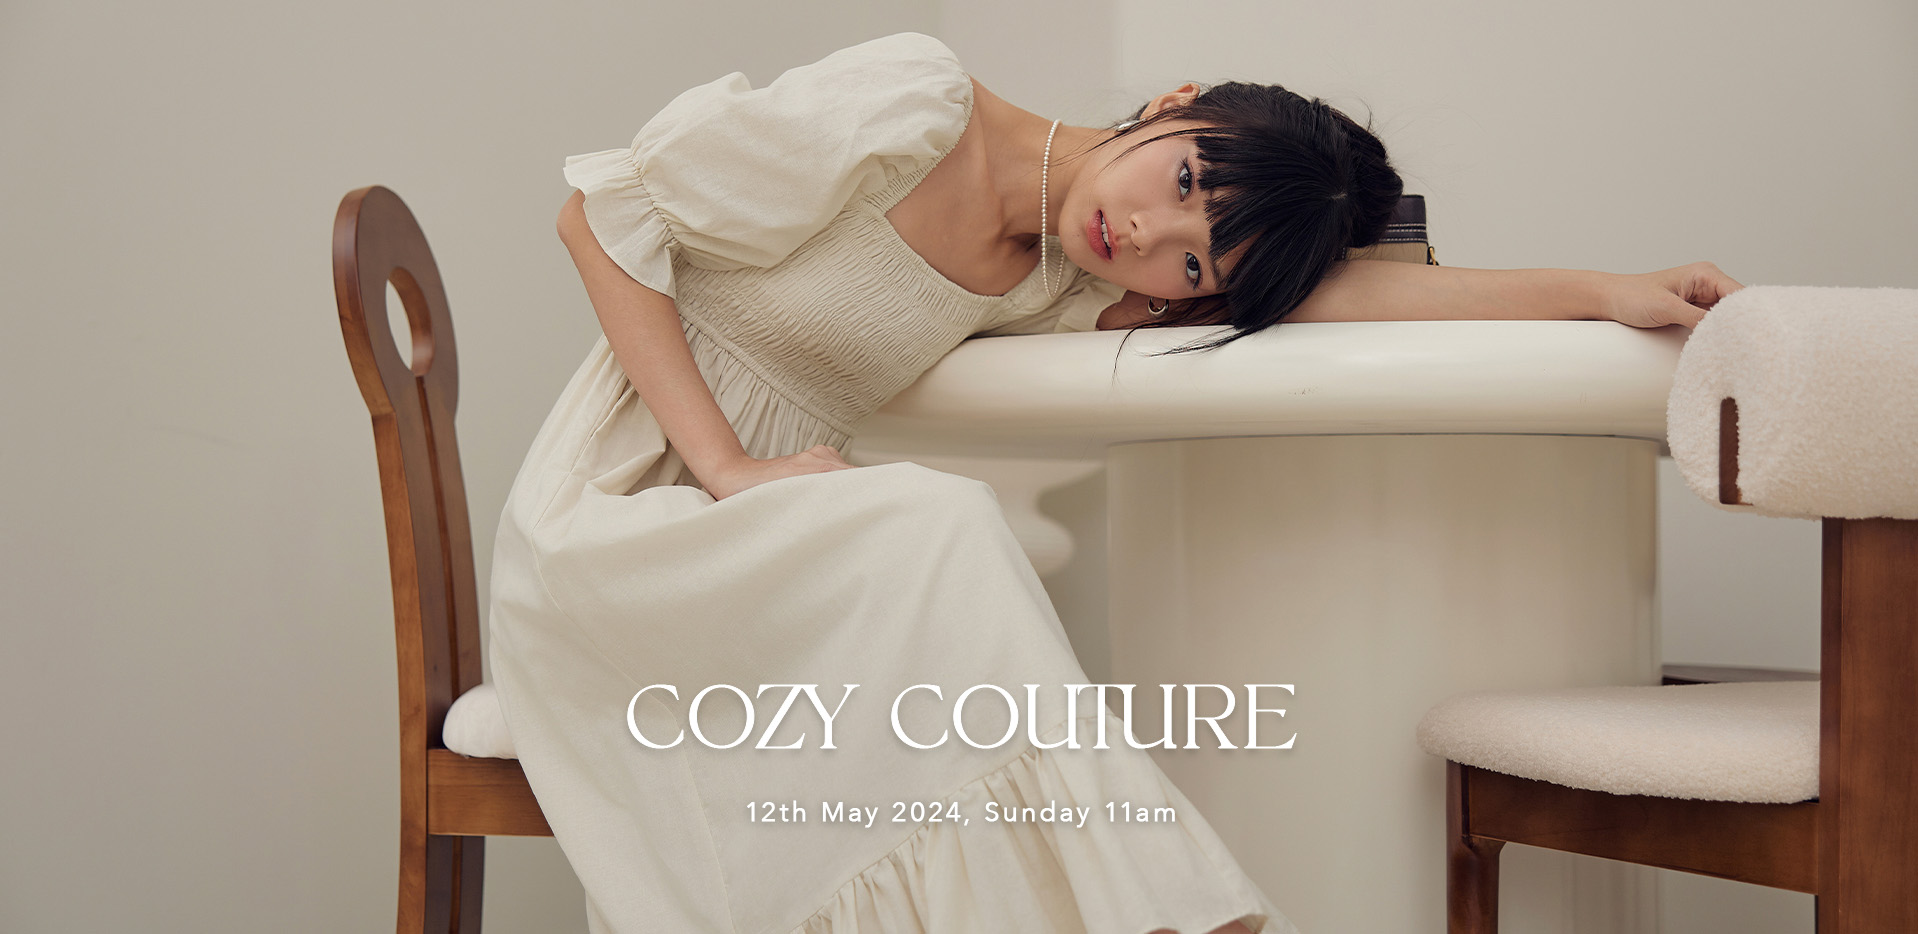 COZY COUTURE